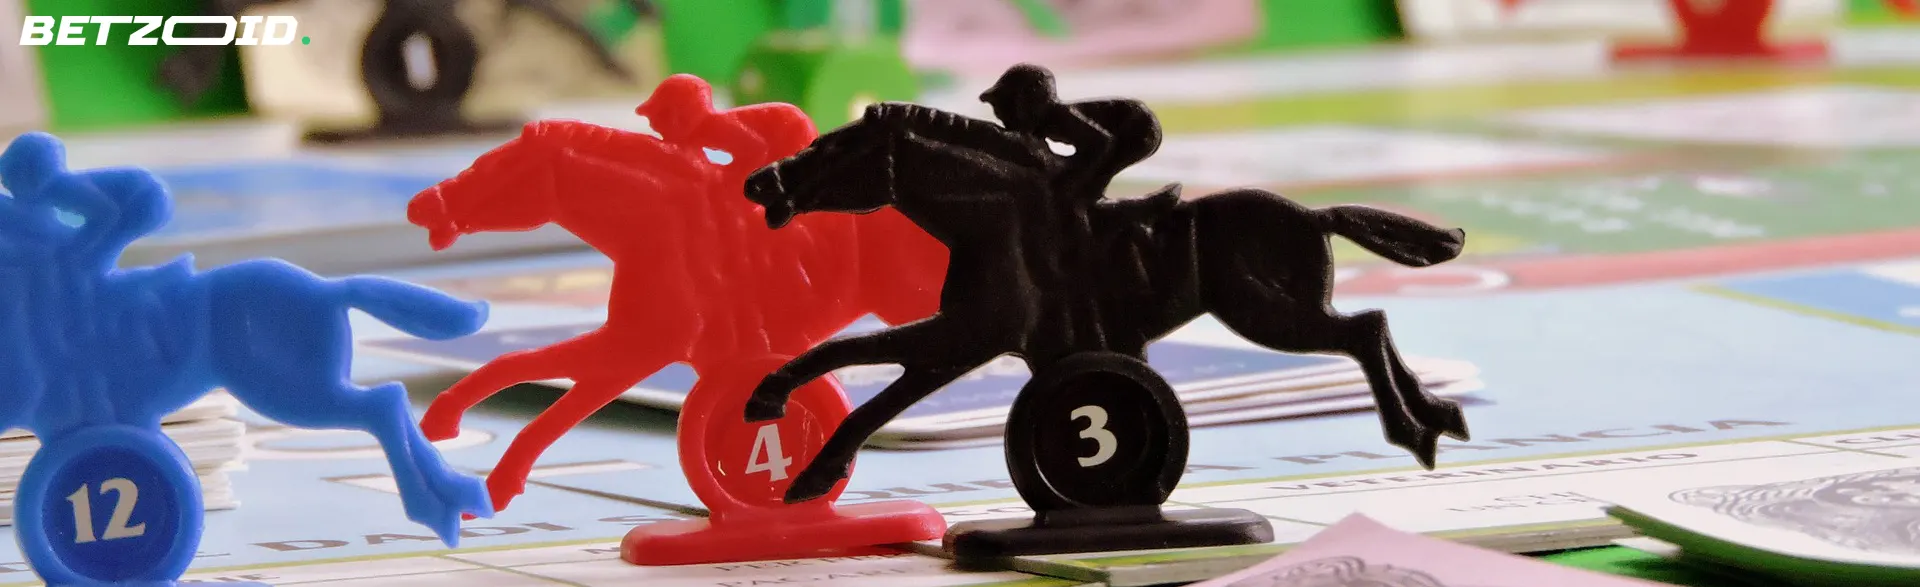 Colorful toy horse race on a game board, symbolizing international betting sites offering free bets in Canada.